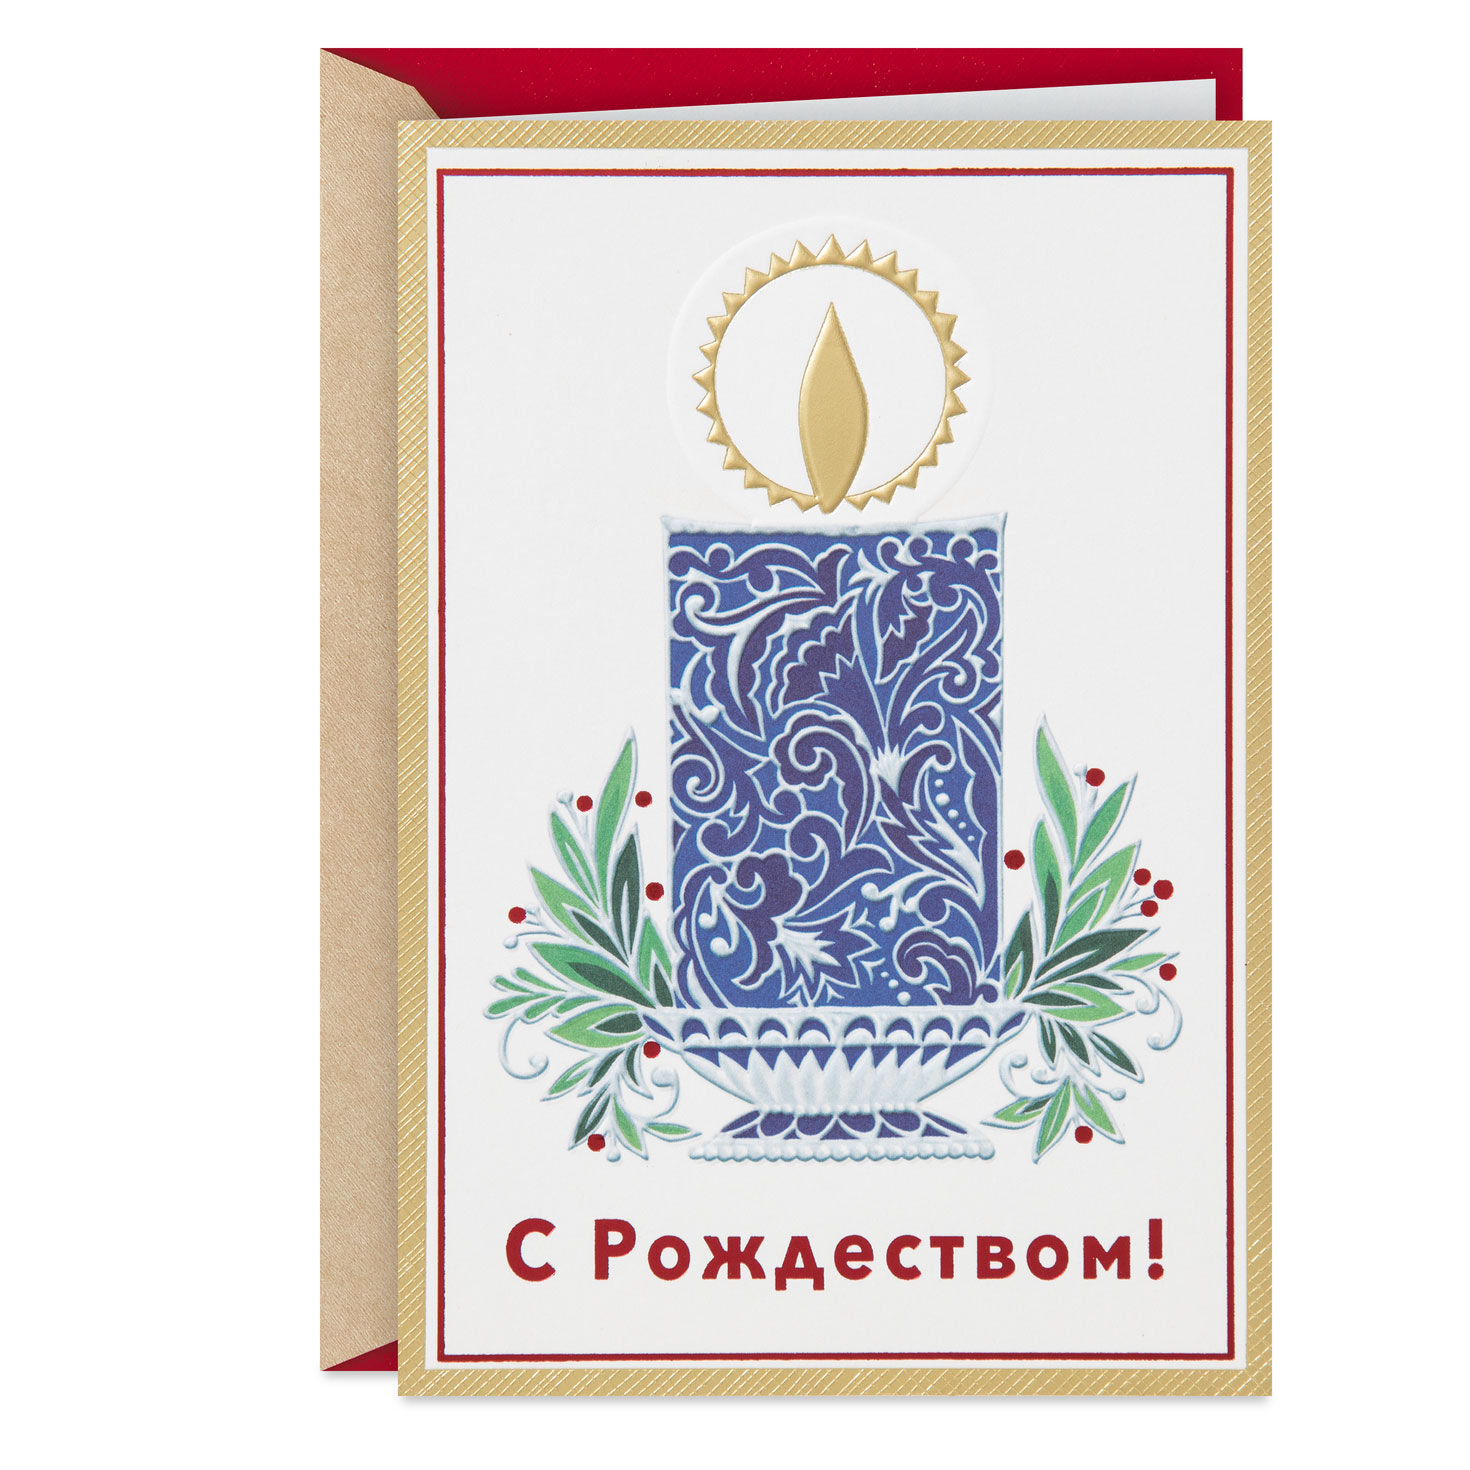 faith-family-and-friends-russian-language-christmas-card-greeting